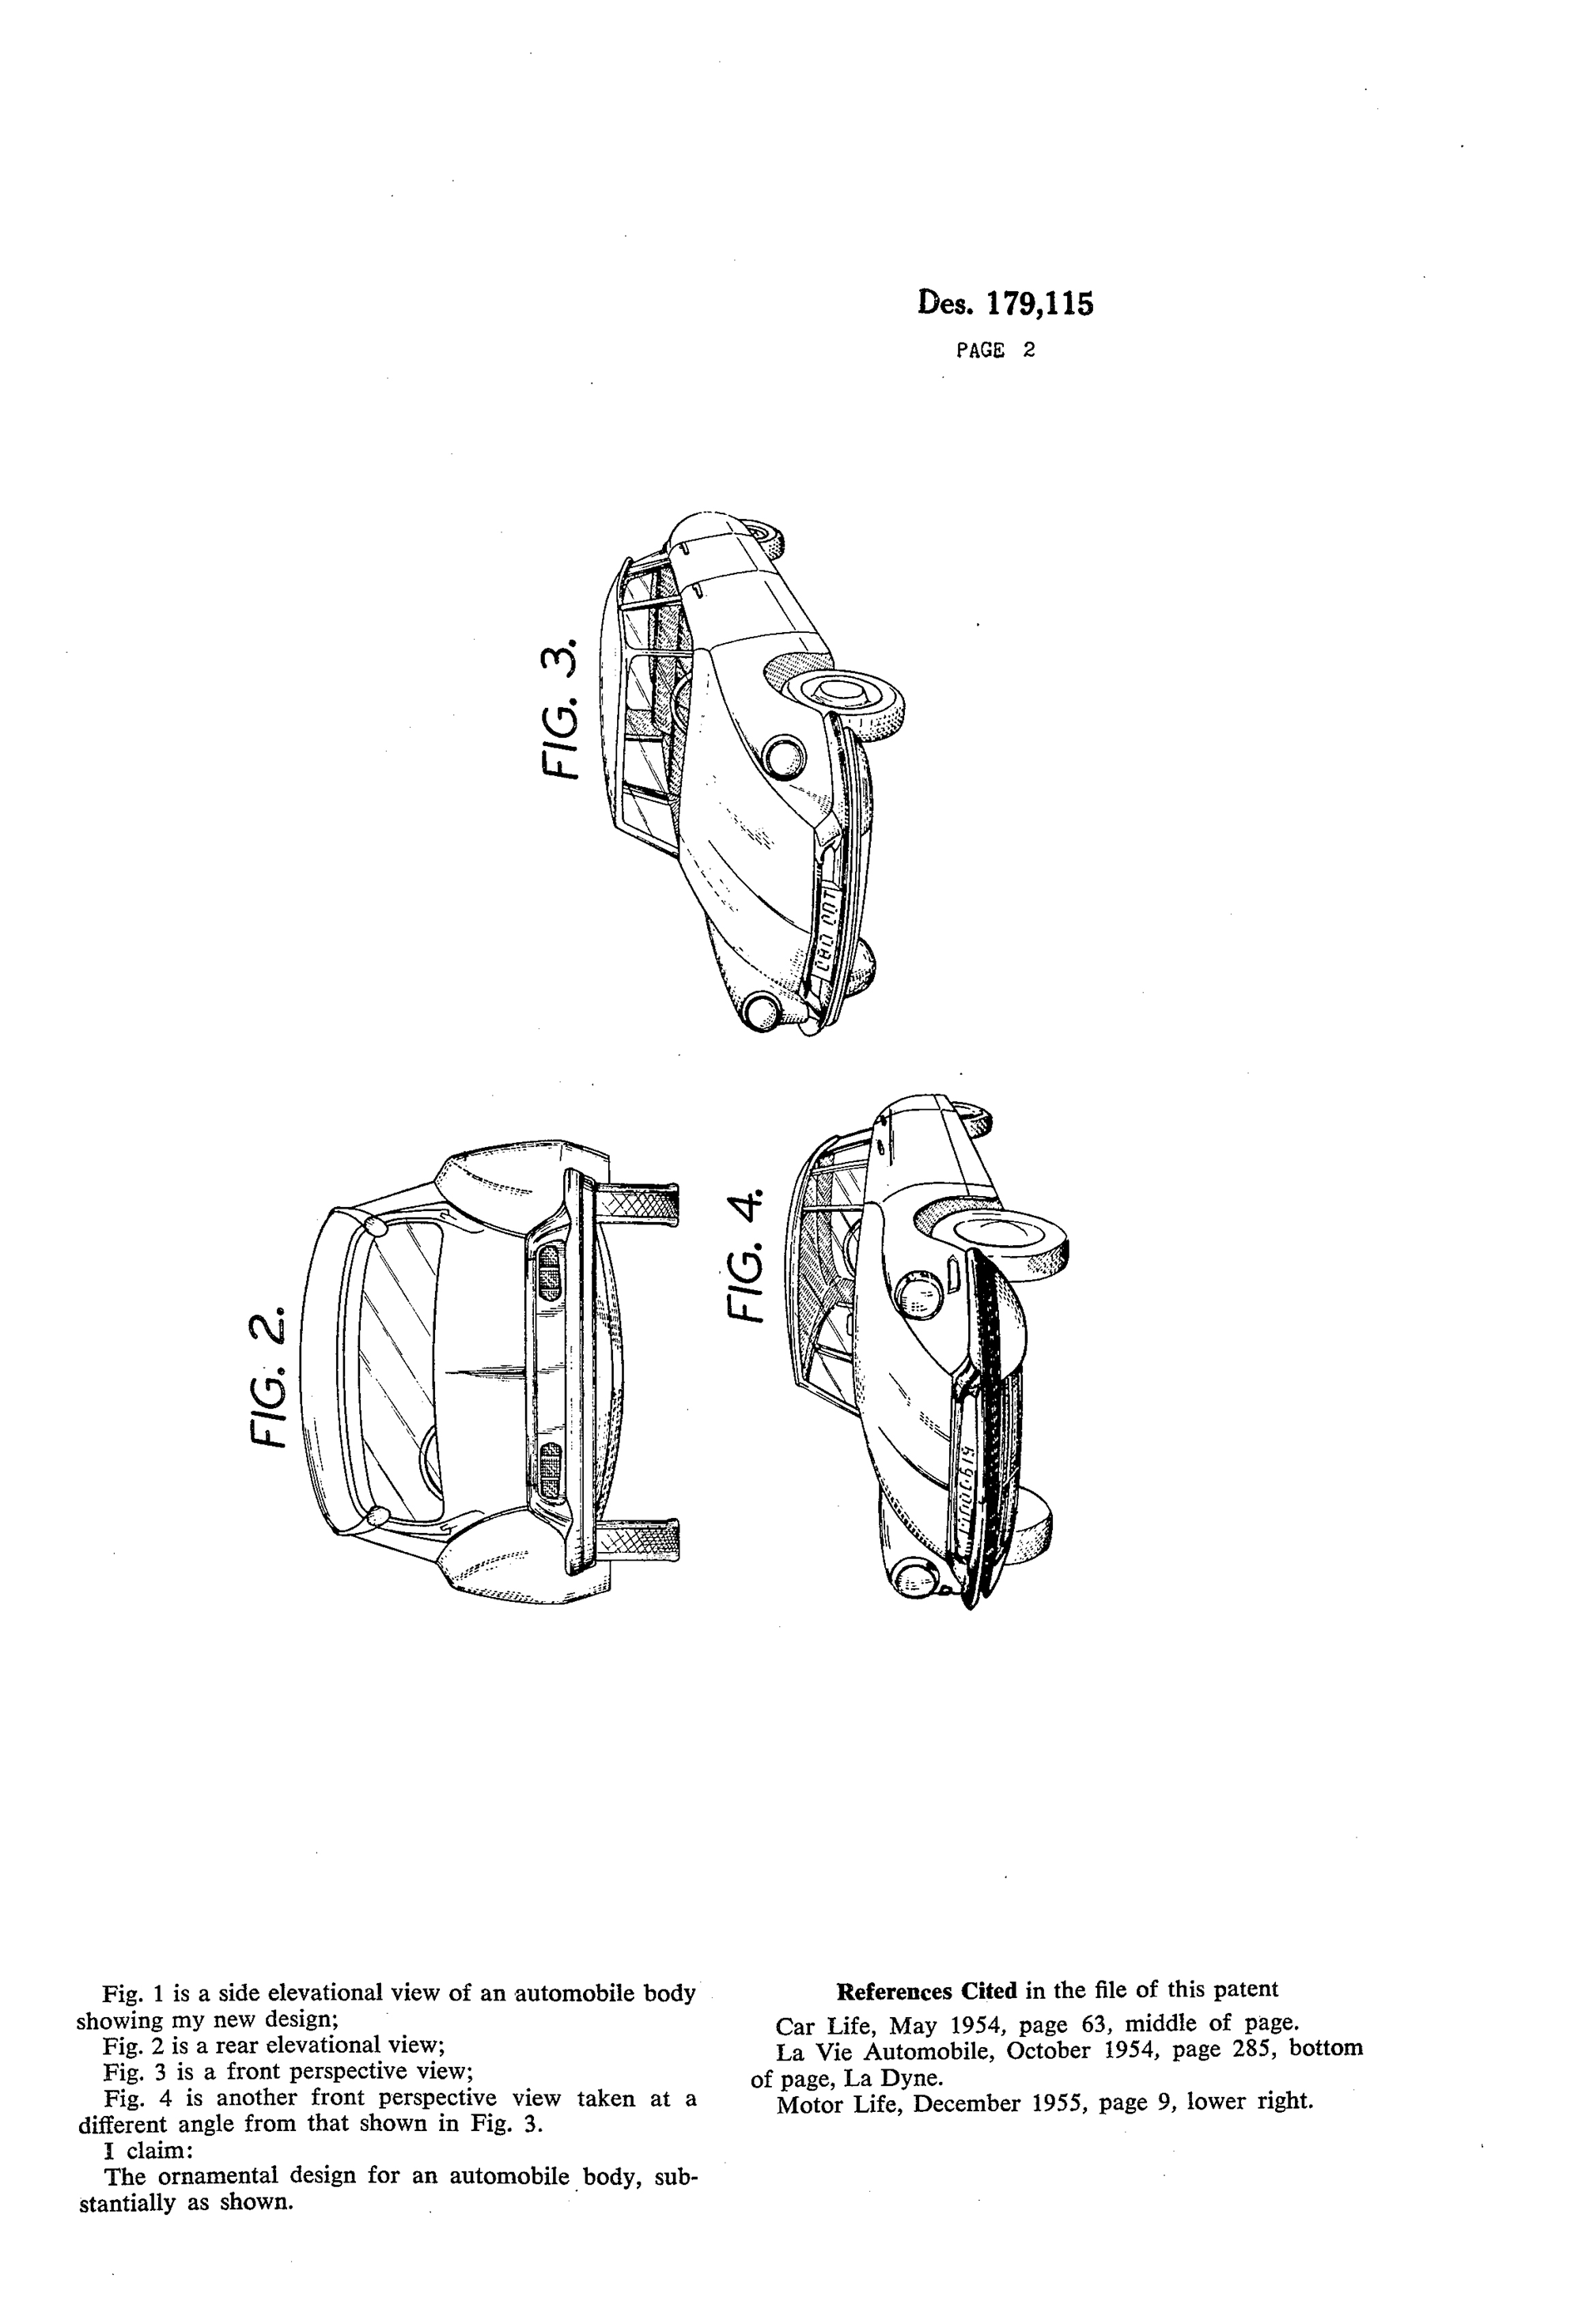 Automobile Body, Antoine Brueder, for Societe Anonyme André Citroën, 1956. Patent Number: USD 179,115, U.S. Patent Office 